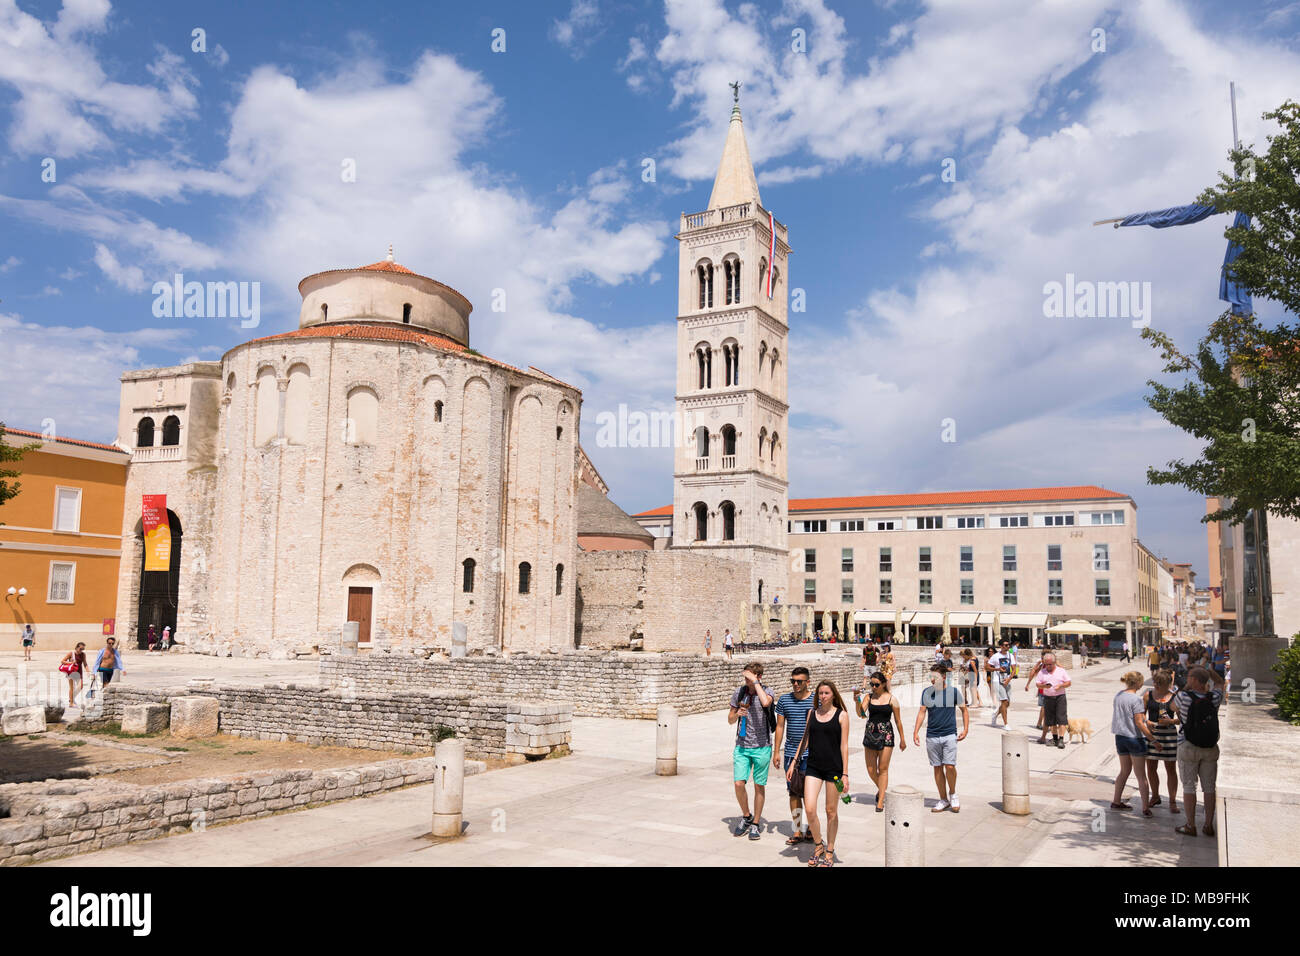 People walking at ancient archaeological Roman finds in front of the St. Donatus church at Zadar, Croatia Stock Photo